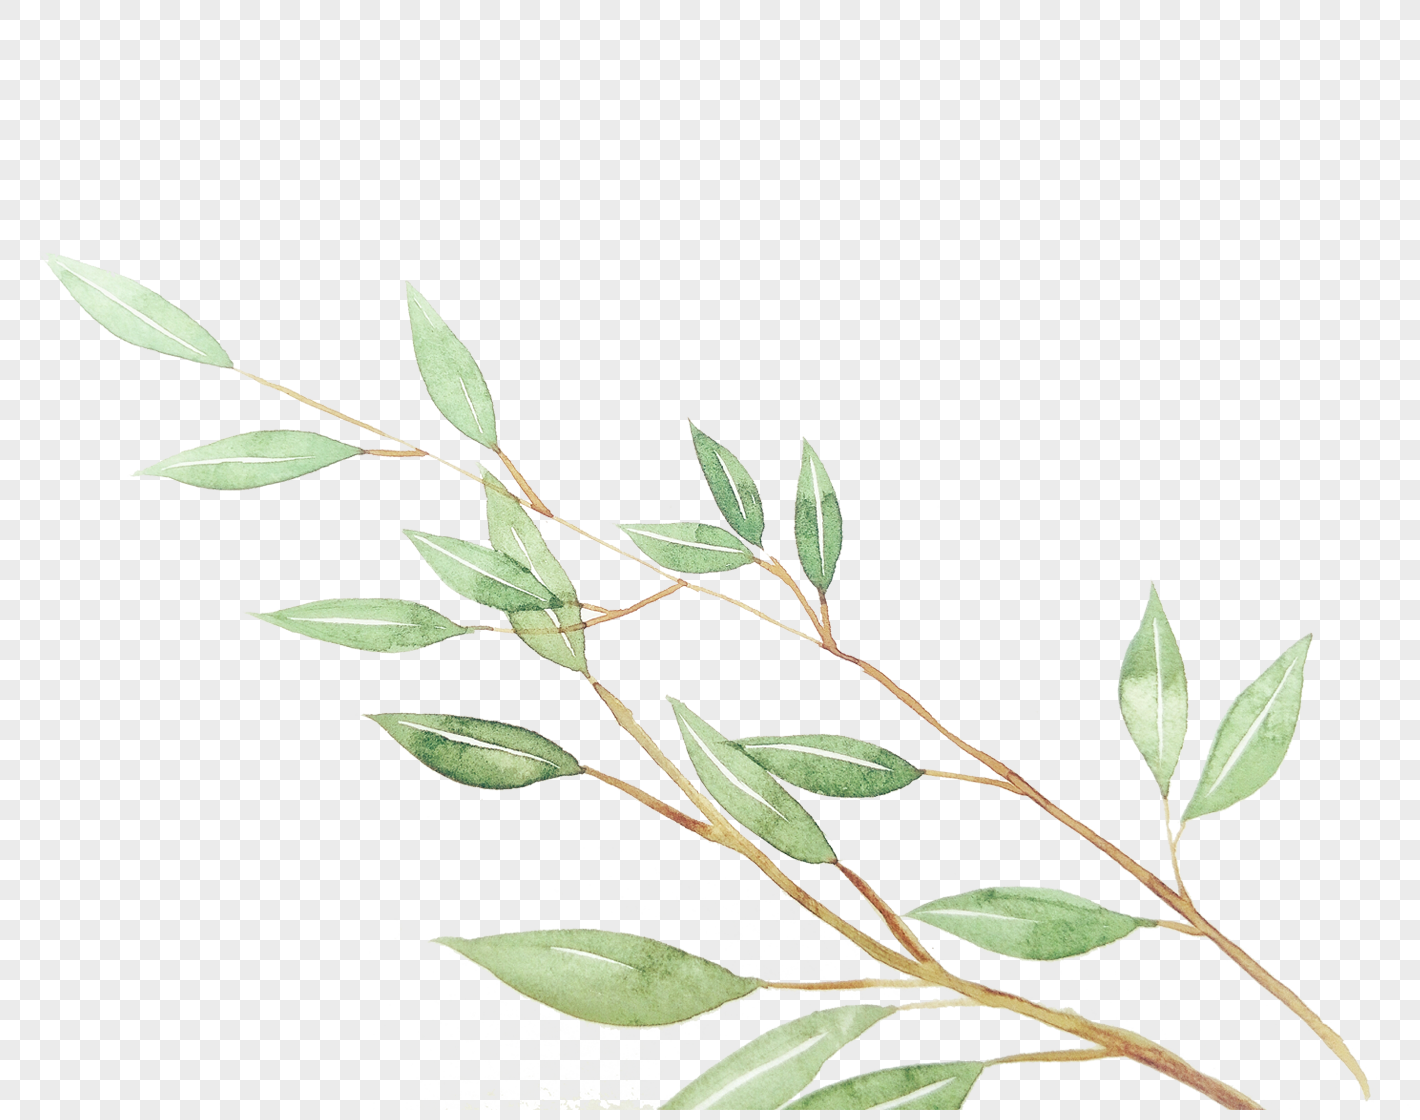 Plants png image_picture free download 400190362_lovepik.com